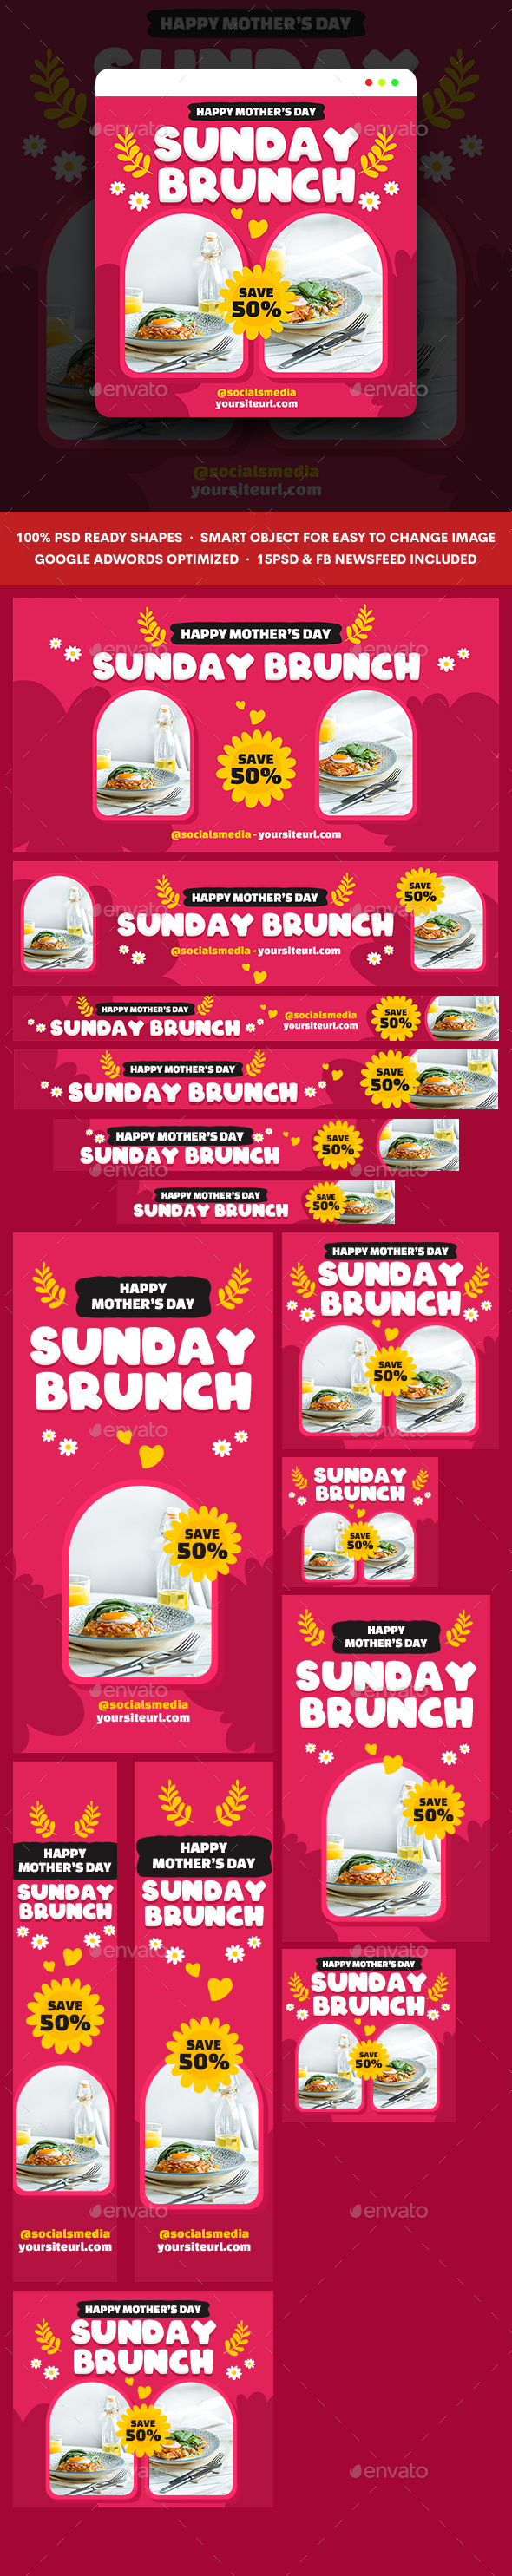 Brunch Sunday Banners Ad